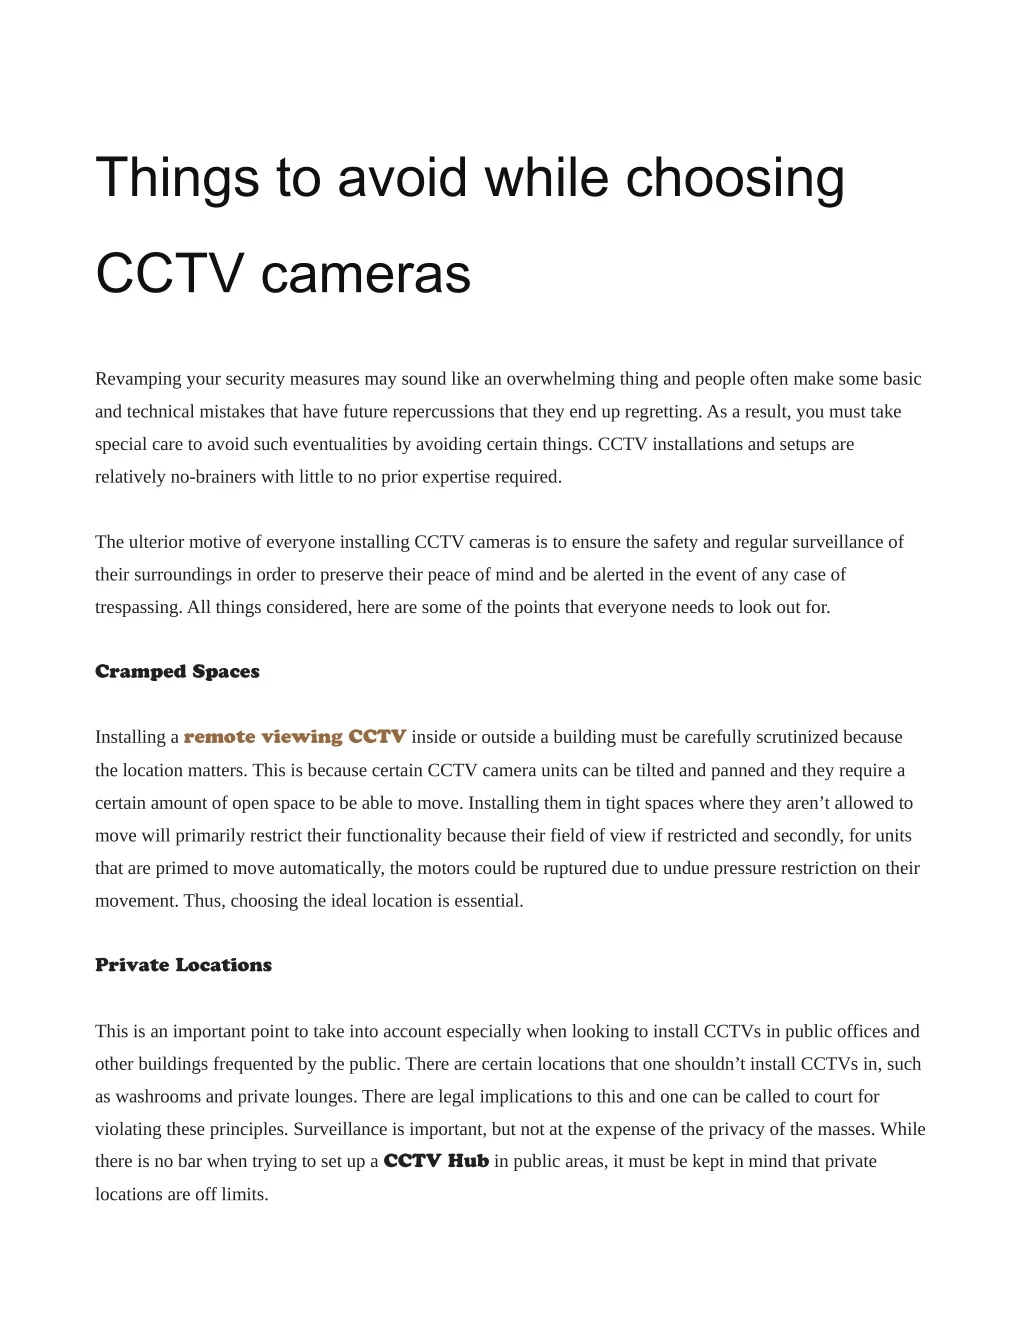 things to avoid while choosing cctv cameras